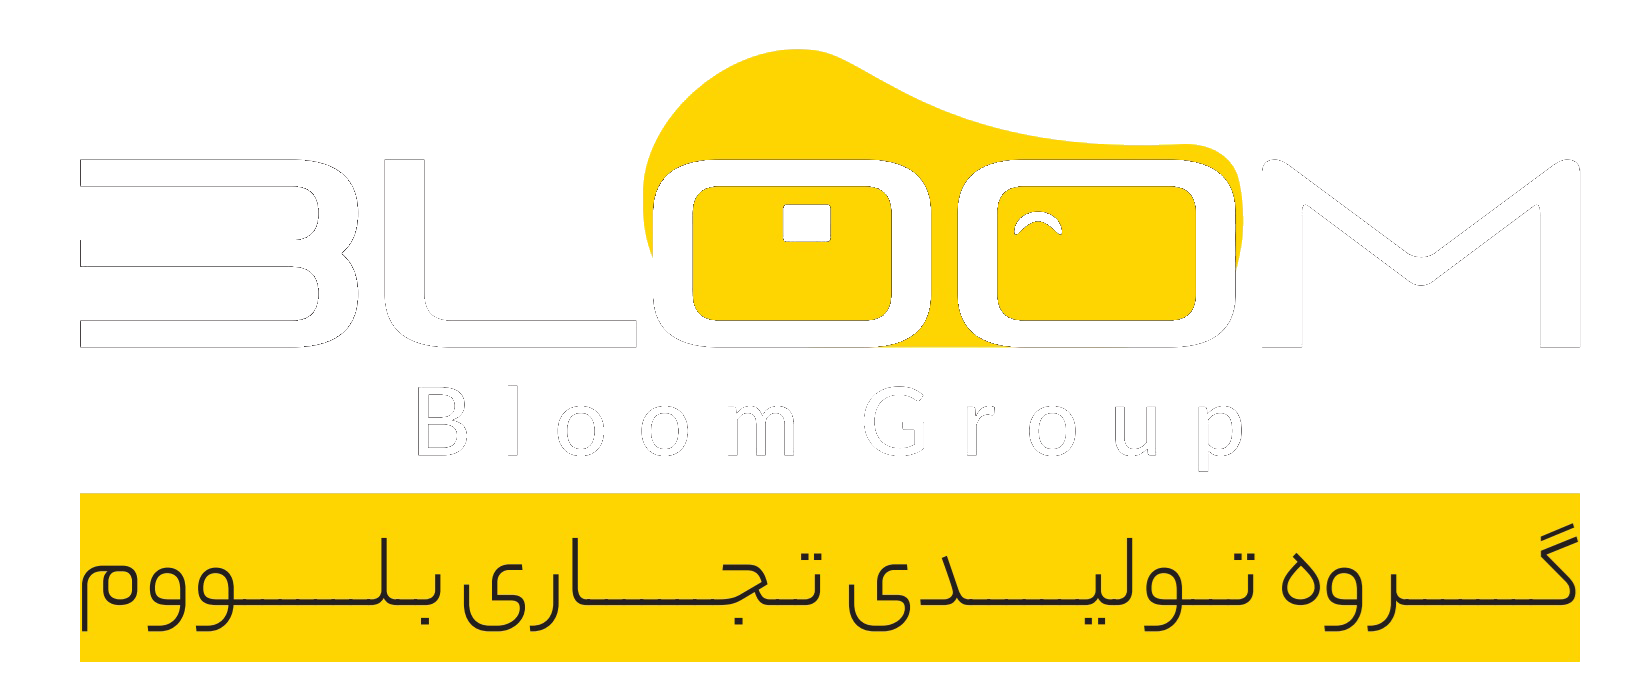 Bloom commercial production group